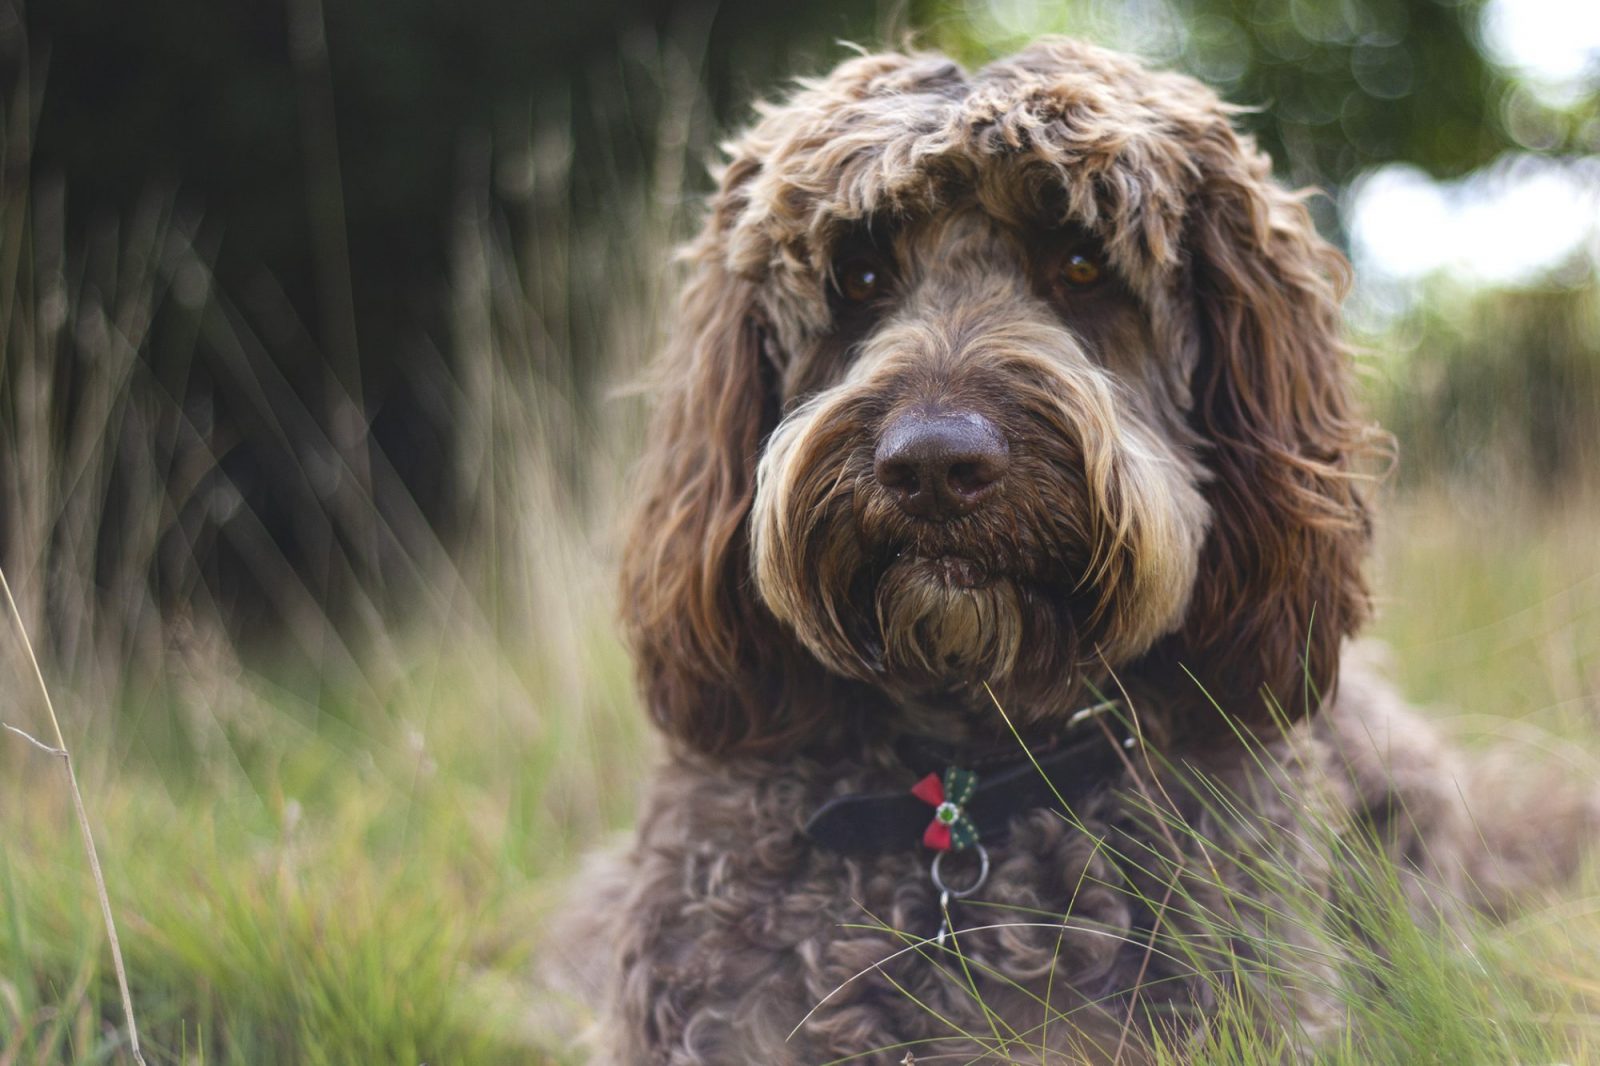 This 🐕 Dog Breeds Quiz May Be a Liiiittle Challenging, But Let’s See If You Can Score 15/20 Labradoodle